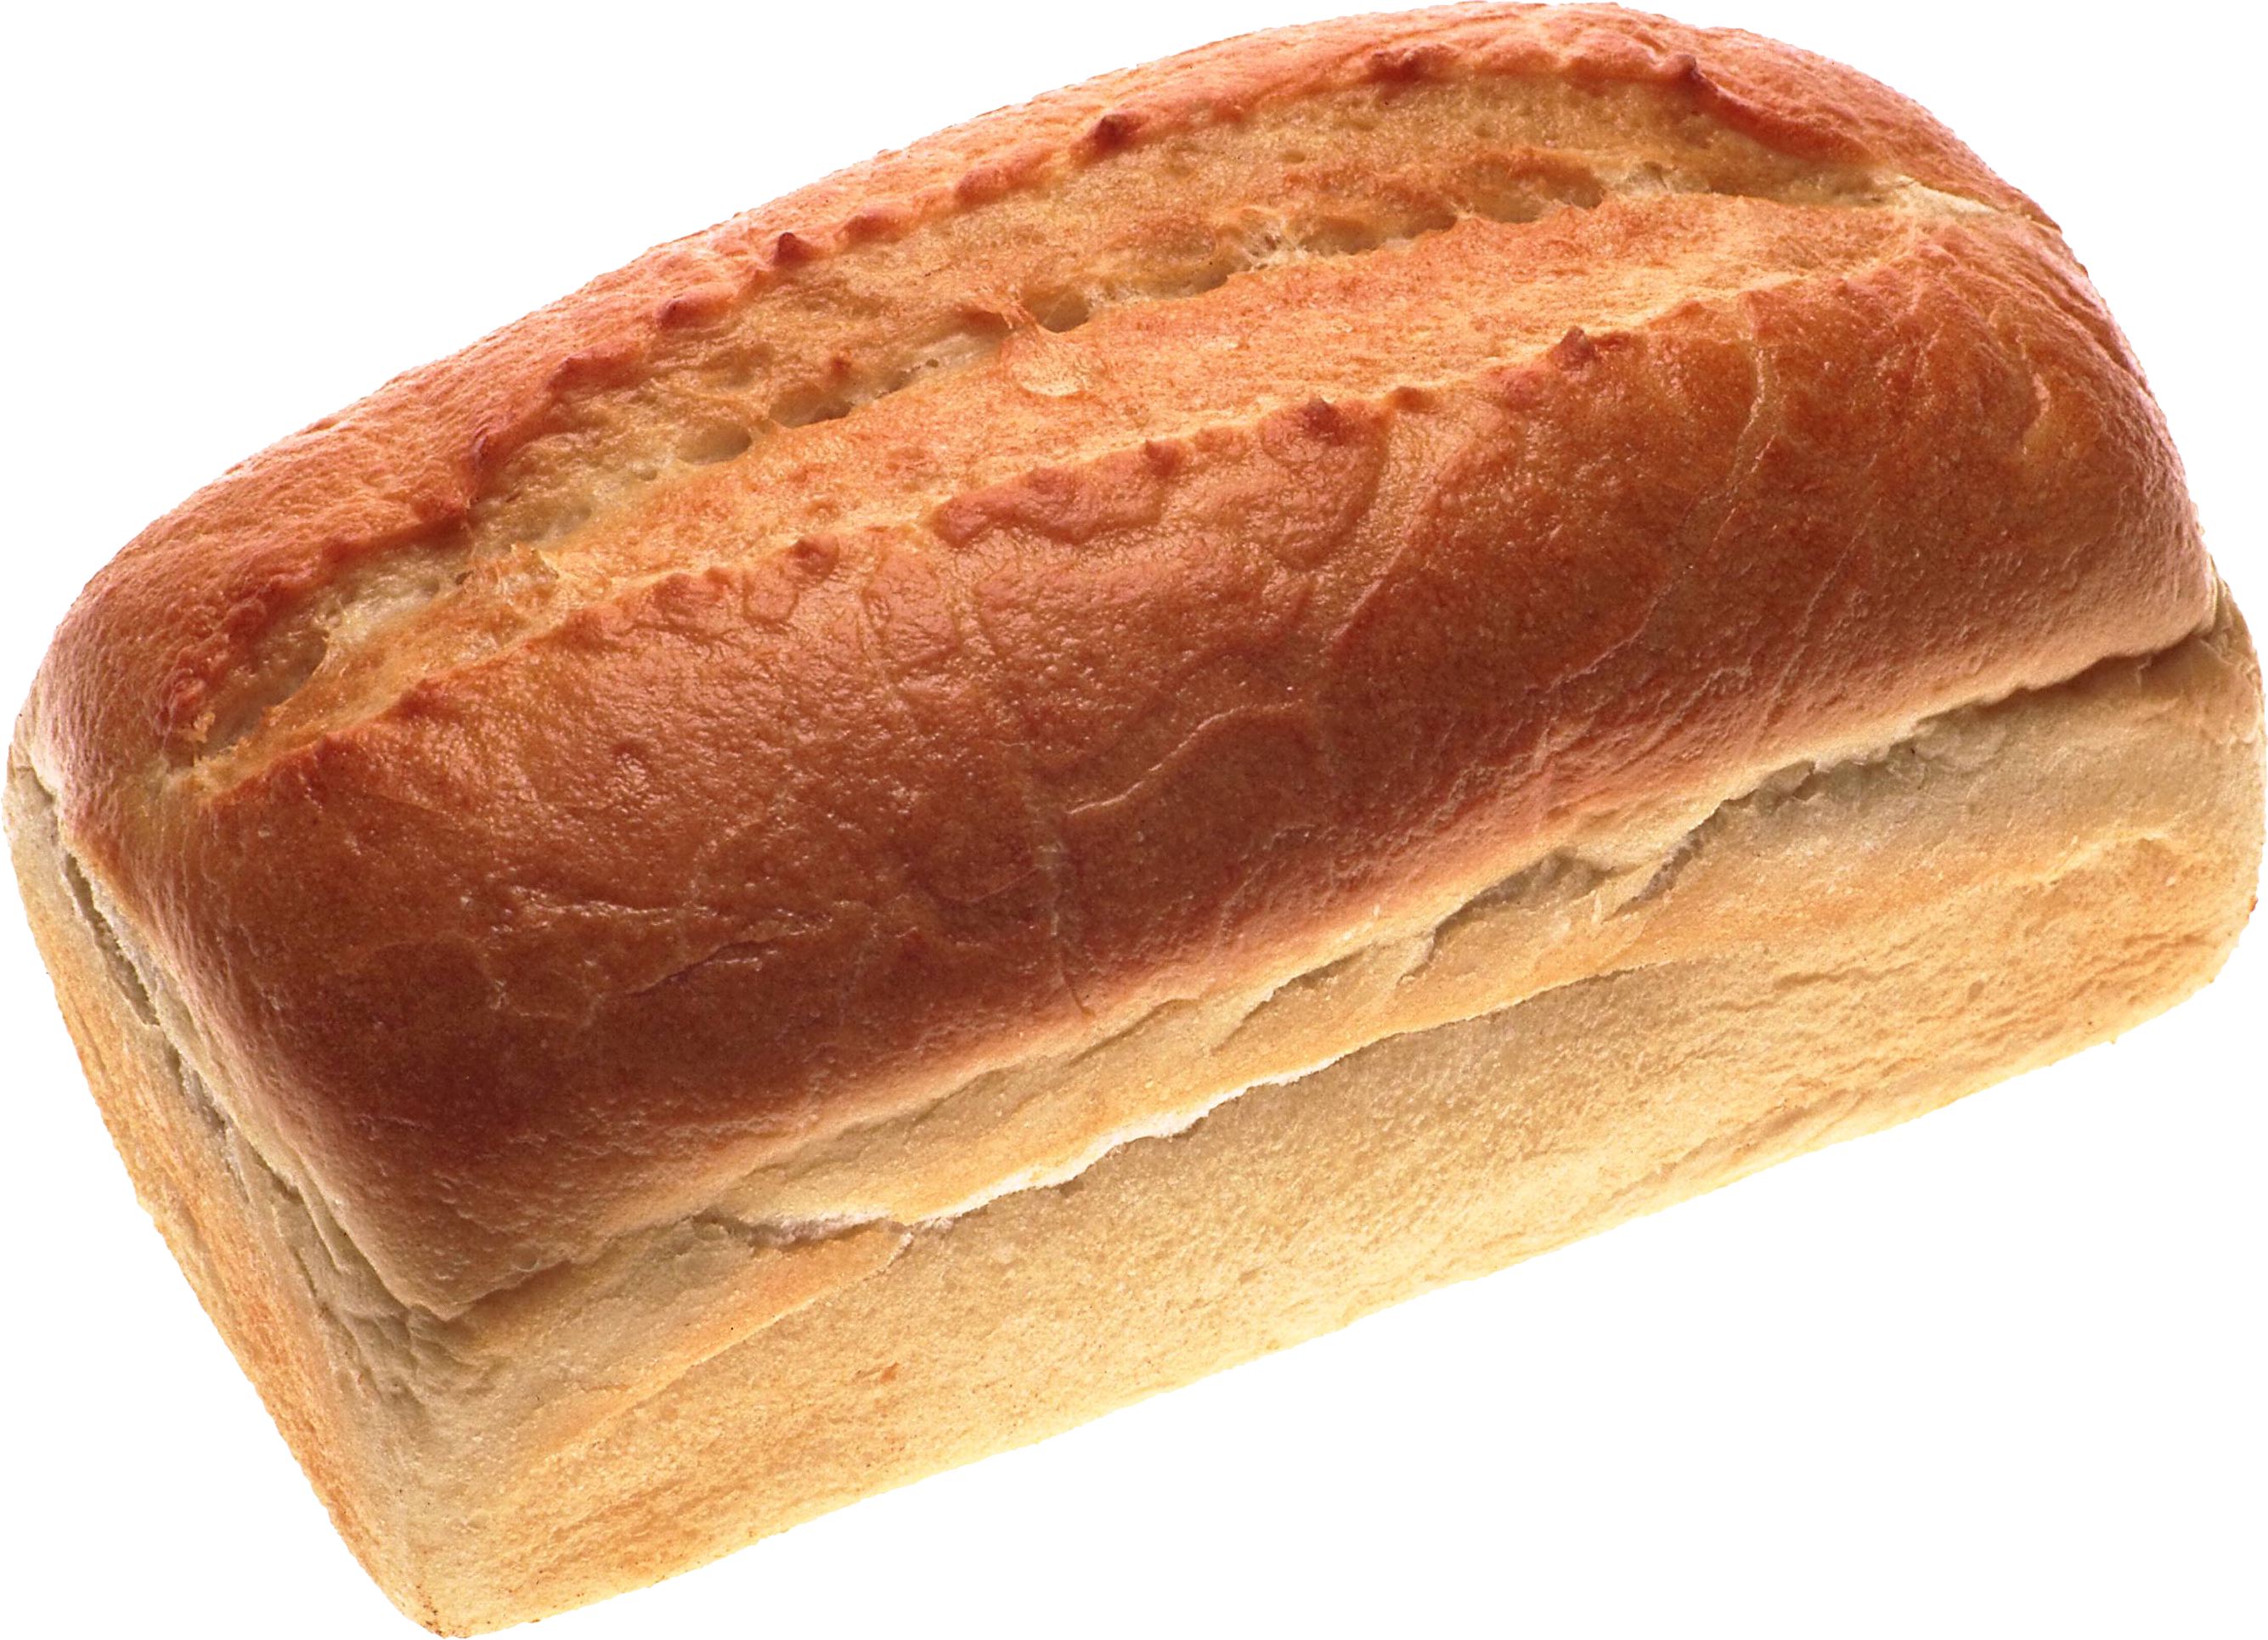 Sliced Loaf of Bread - Bread 